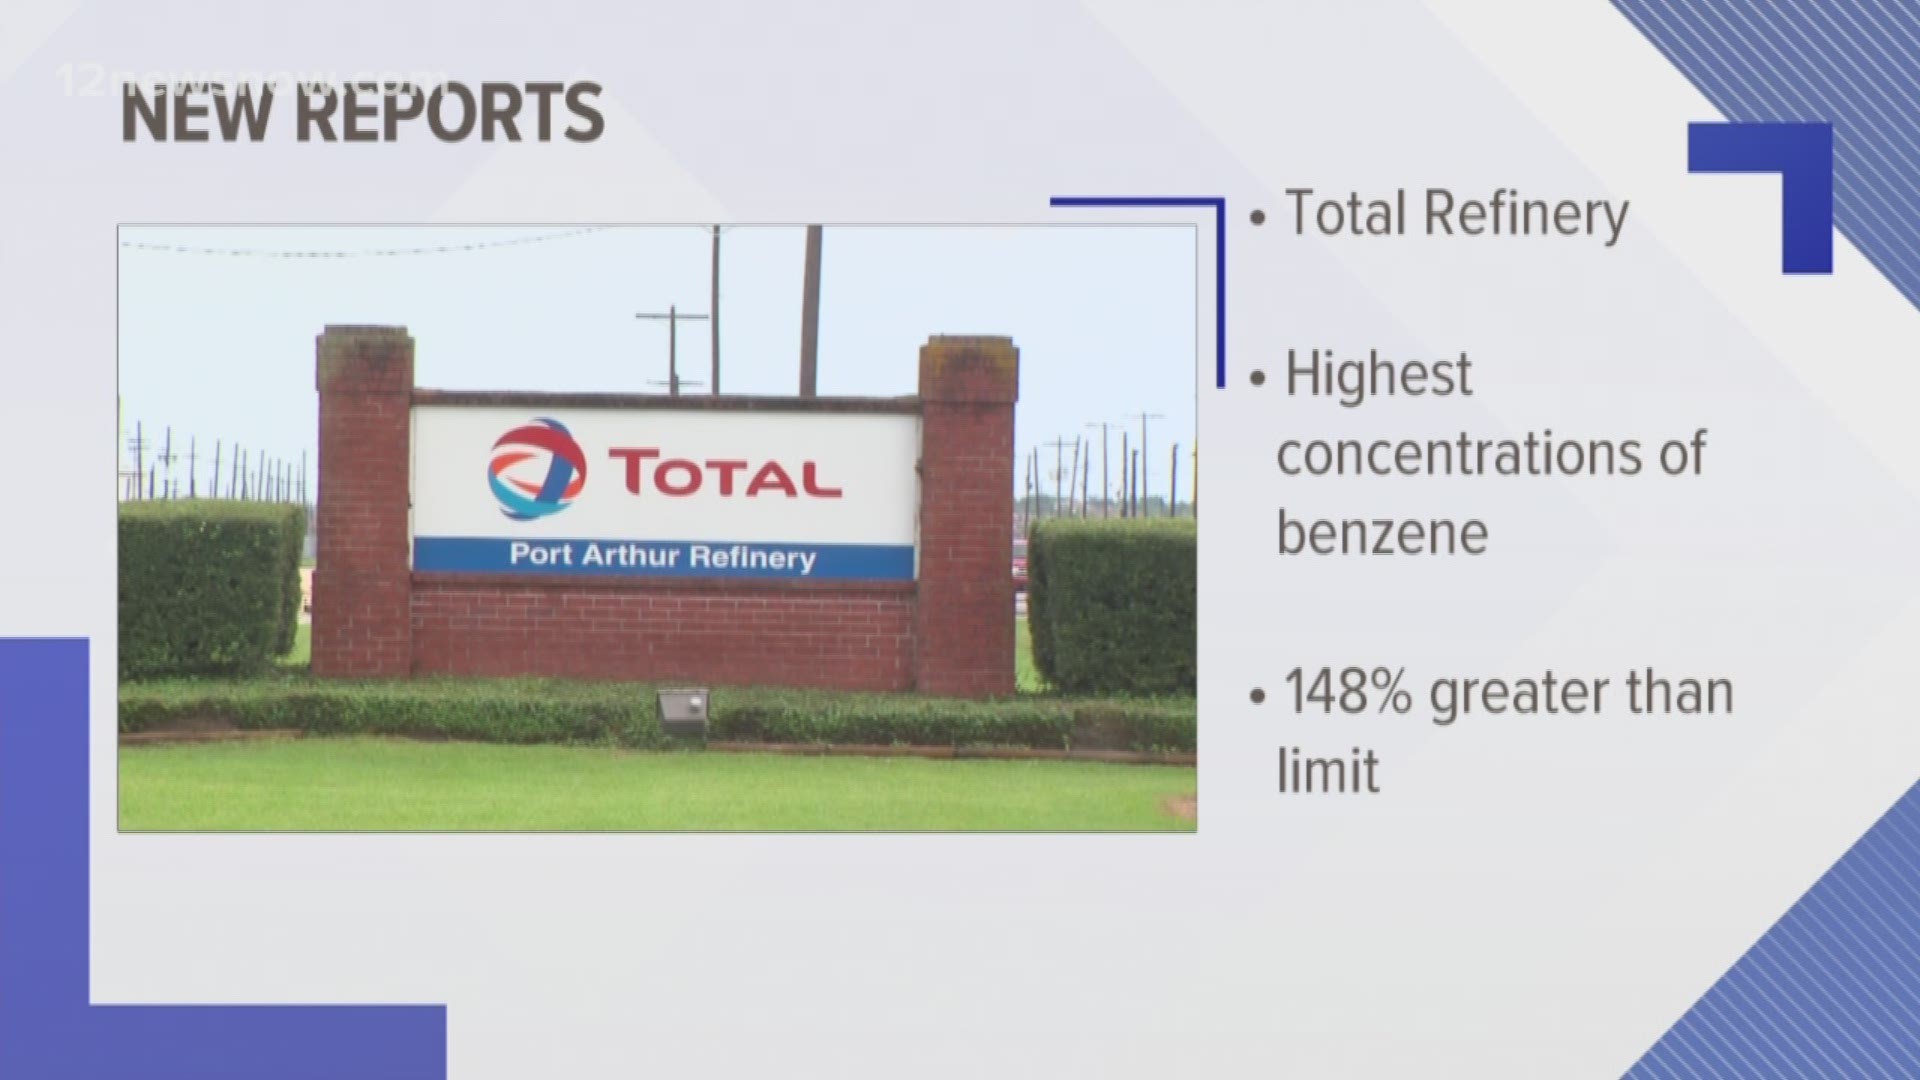 A new report from an environmental group puts Total's Port Arthur refinery on a troubling list.